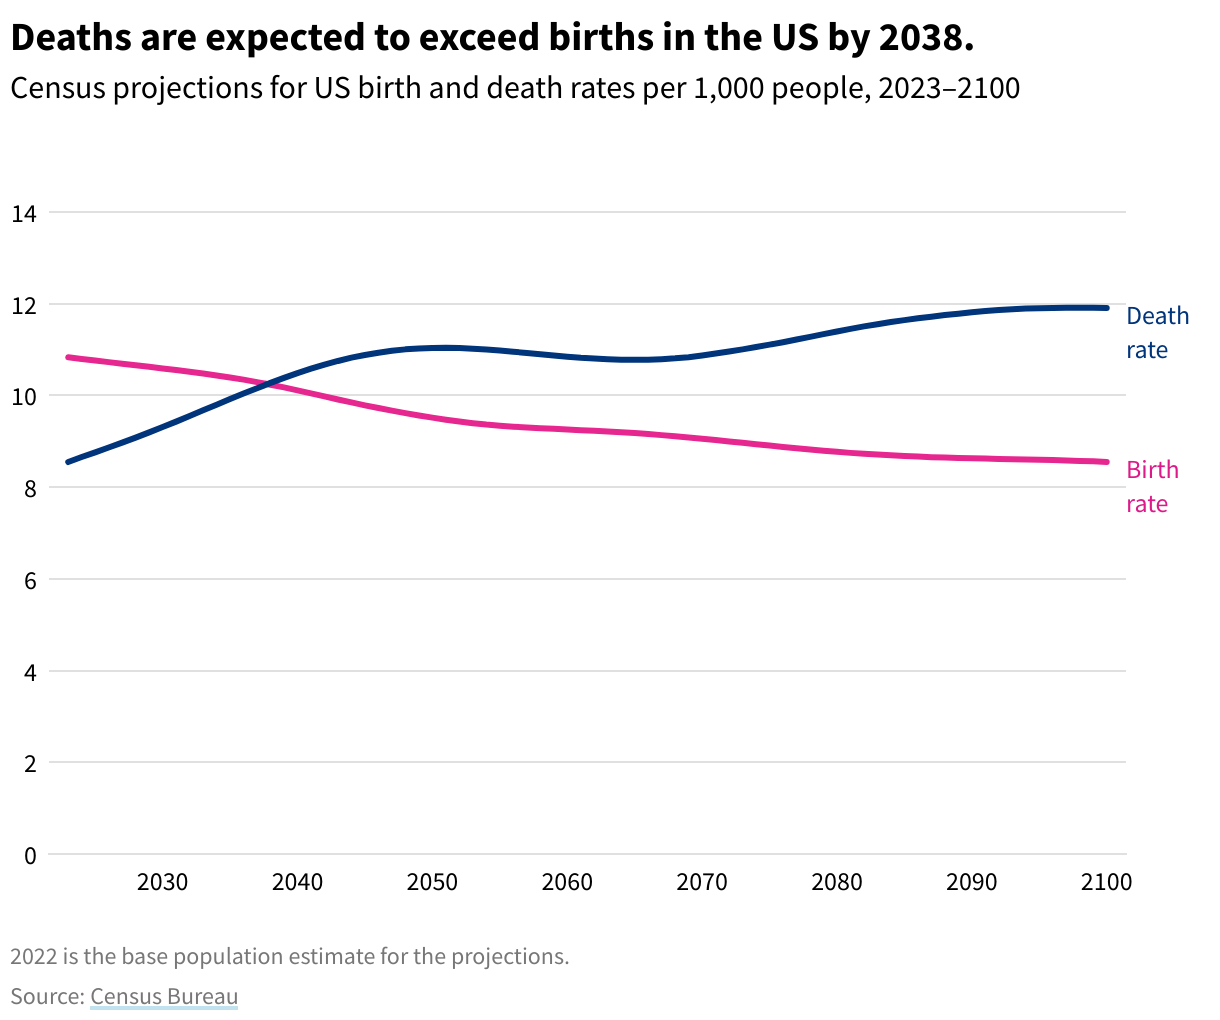 Line graph showing census projections for US birth and death rates, 2023–2100. Deaths are expected to exceed births in the US by 2038.